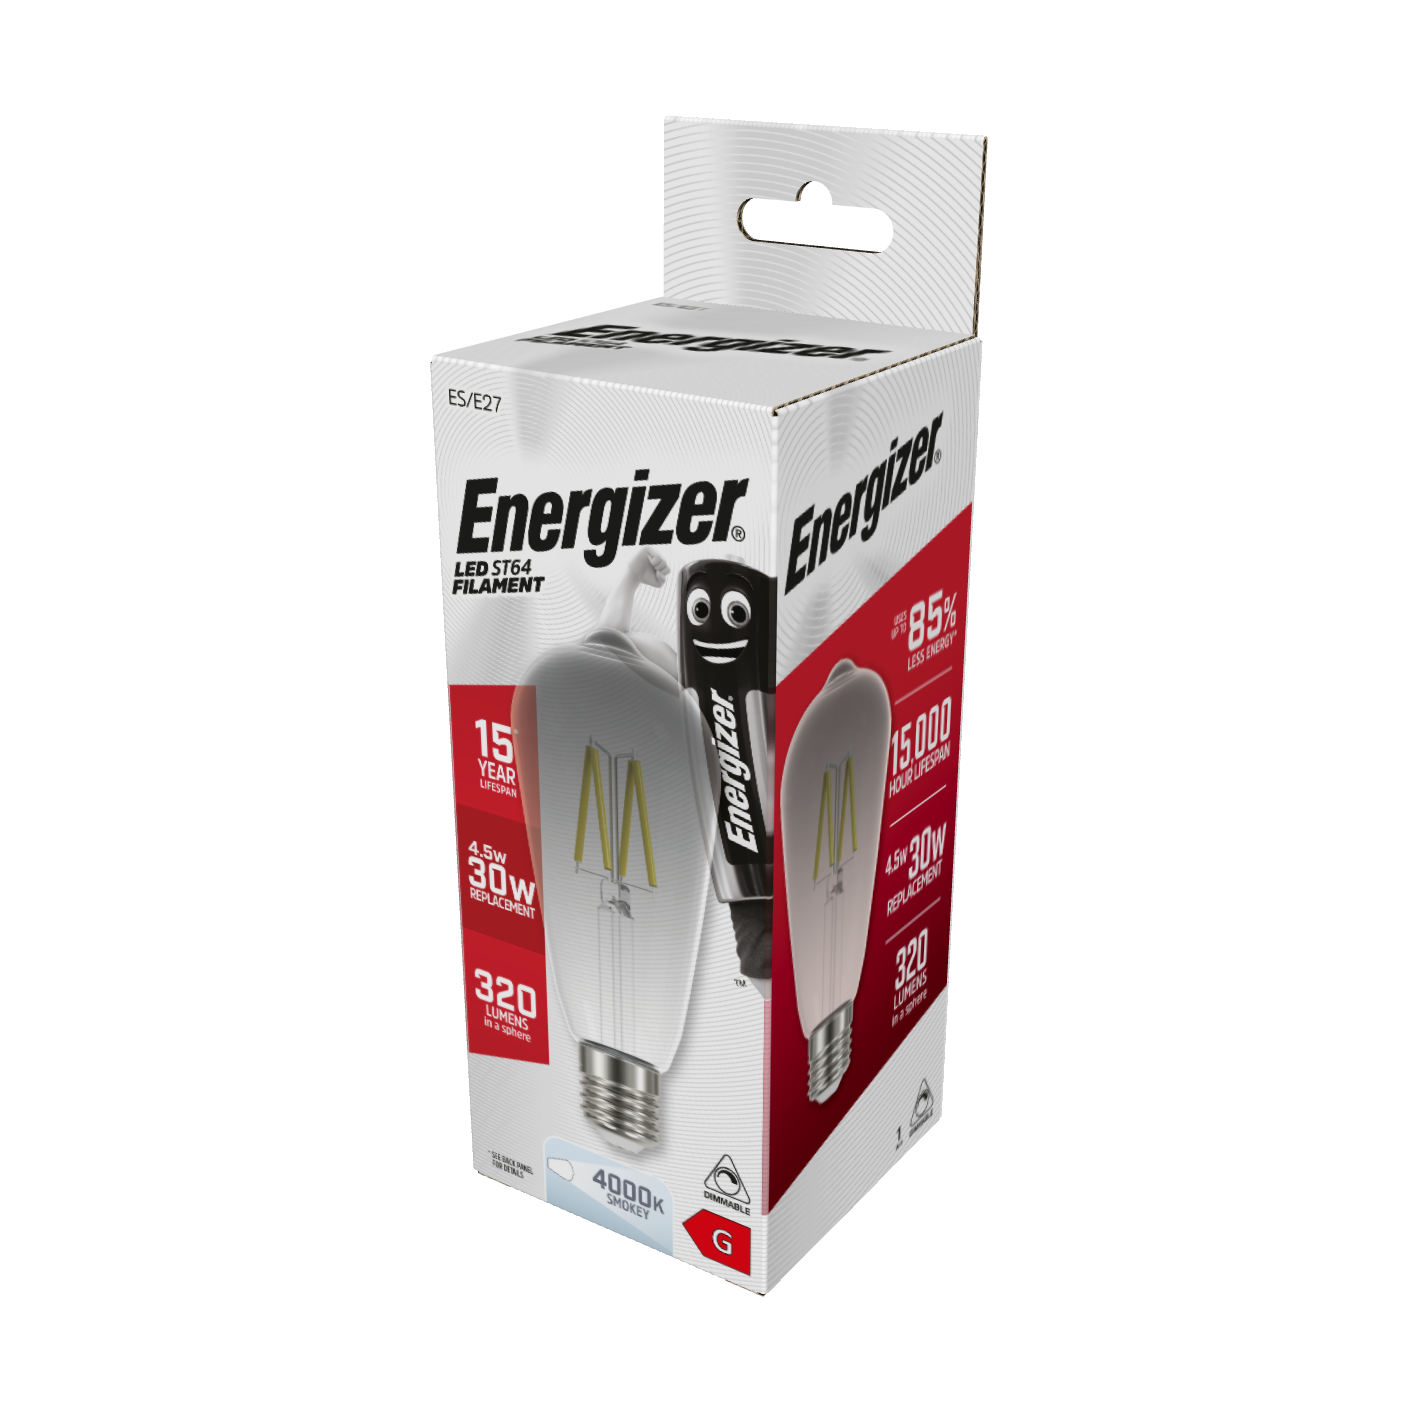 Energizer LED Filament ST64 E27 (ES) Smokey 320lm 4.5W 4,000K (Cool White) Dimmable, Box of 1